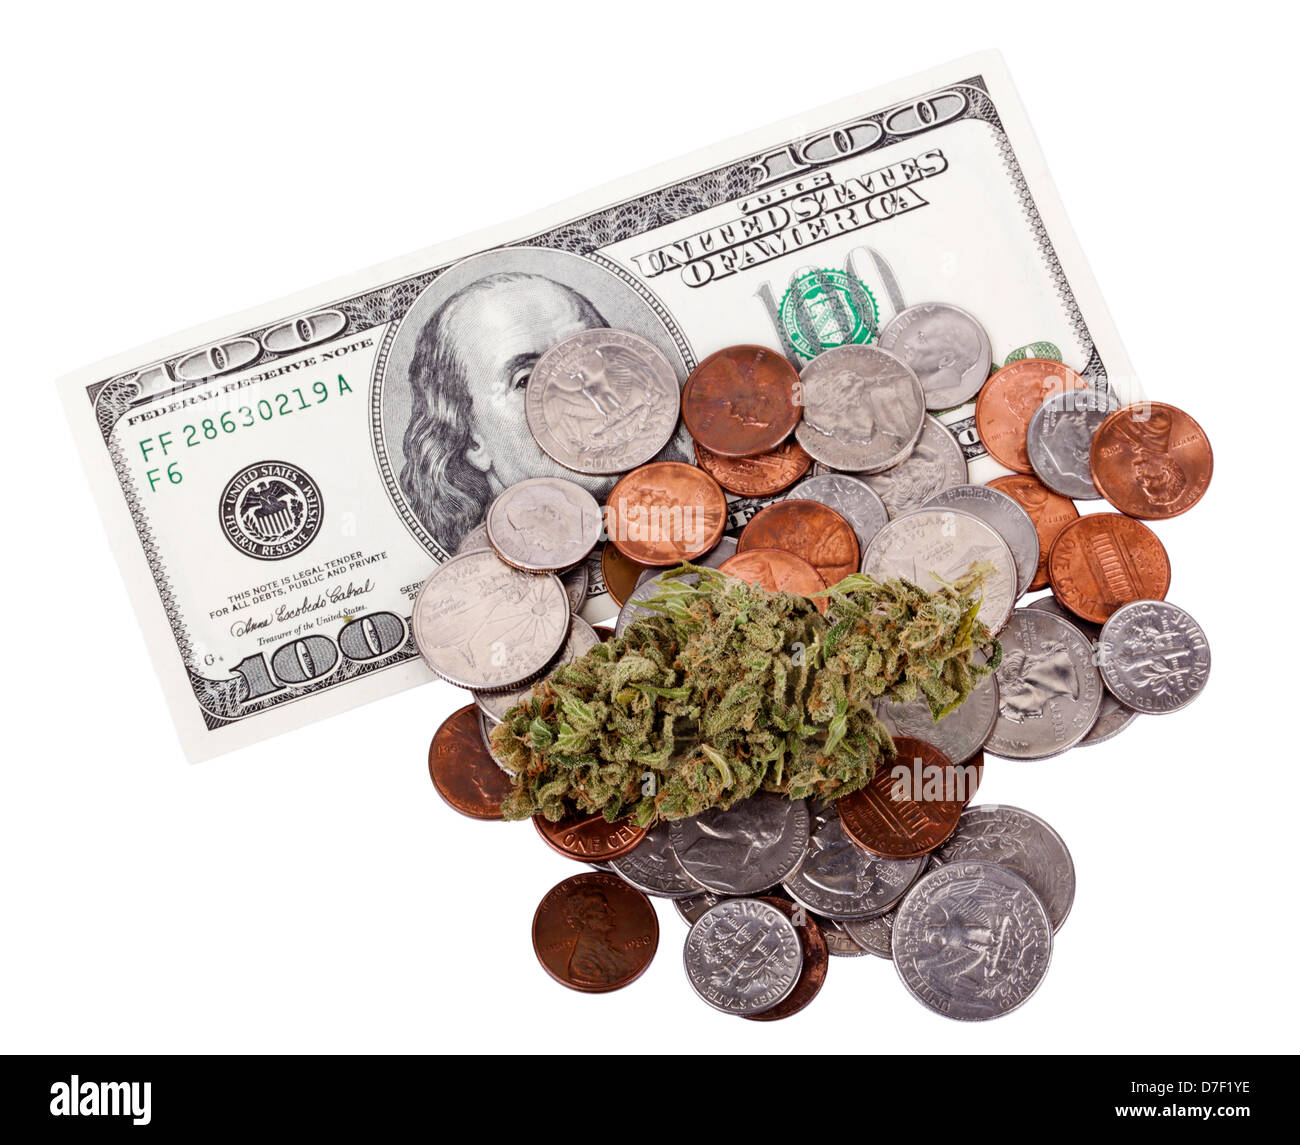 A high grade hydrophonic Cannabis (Marijuana) bud resting on pile various USA coins - pennies quarters dimes nickels as awell Stock Photo